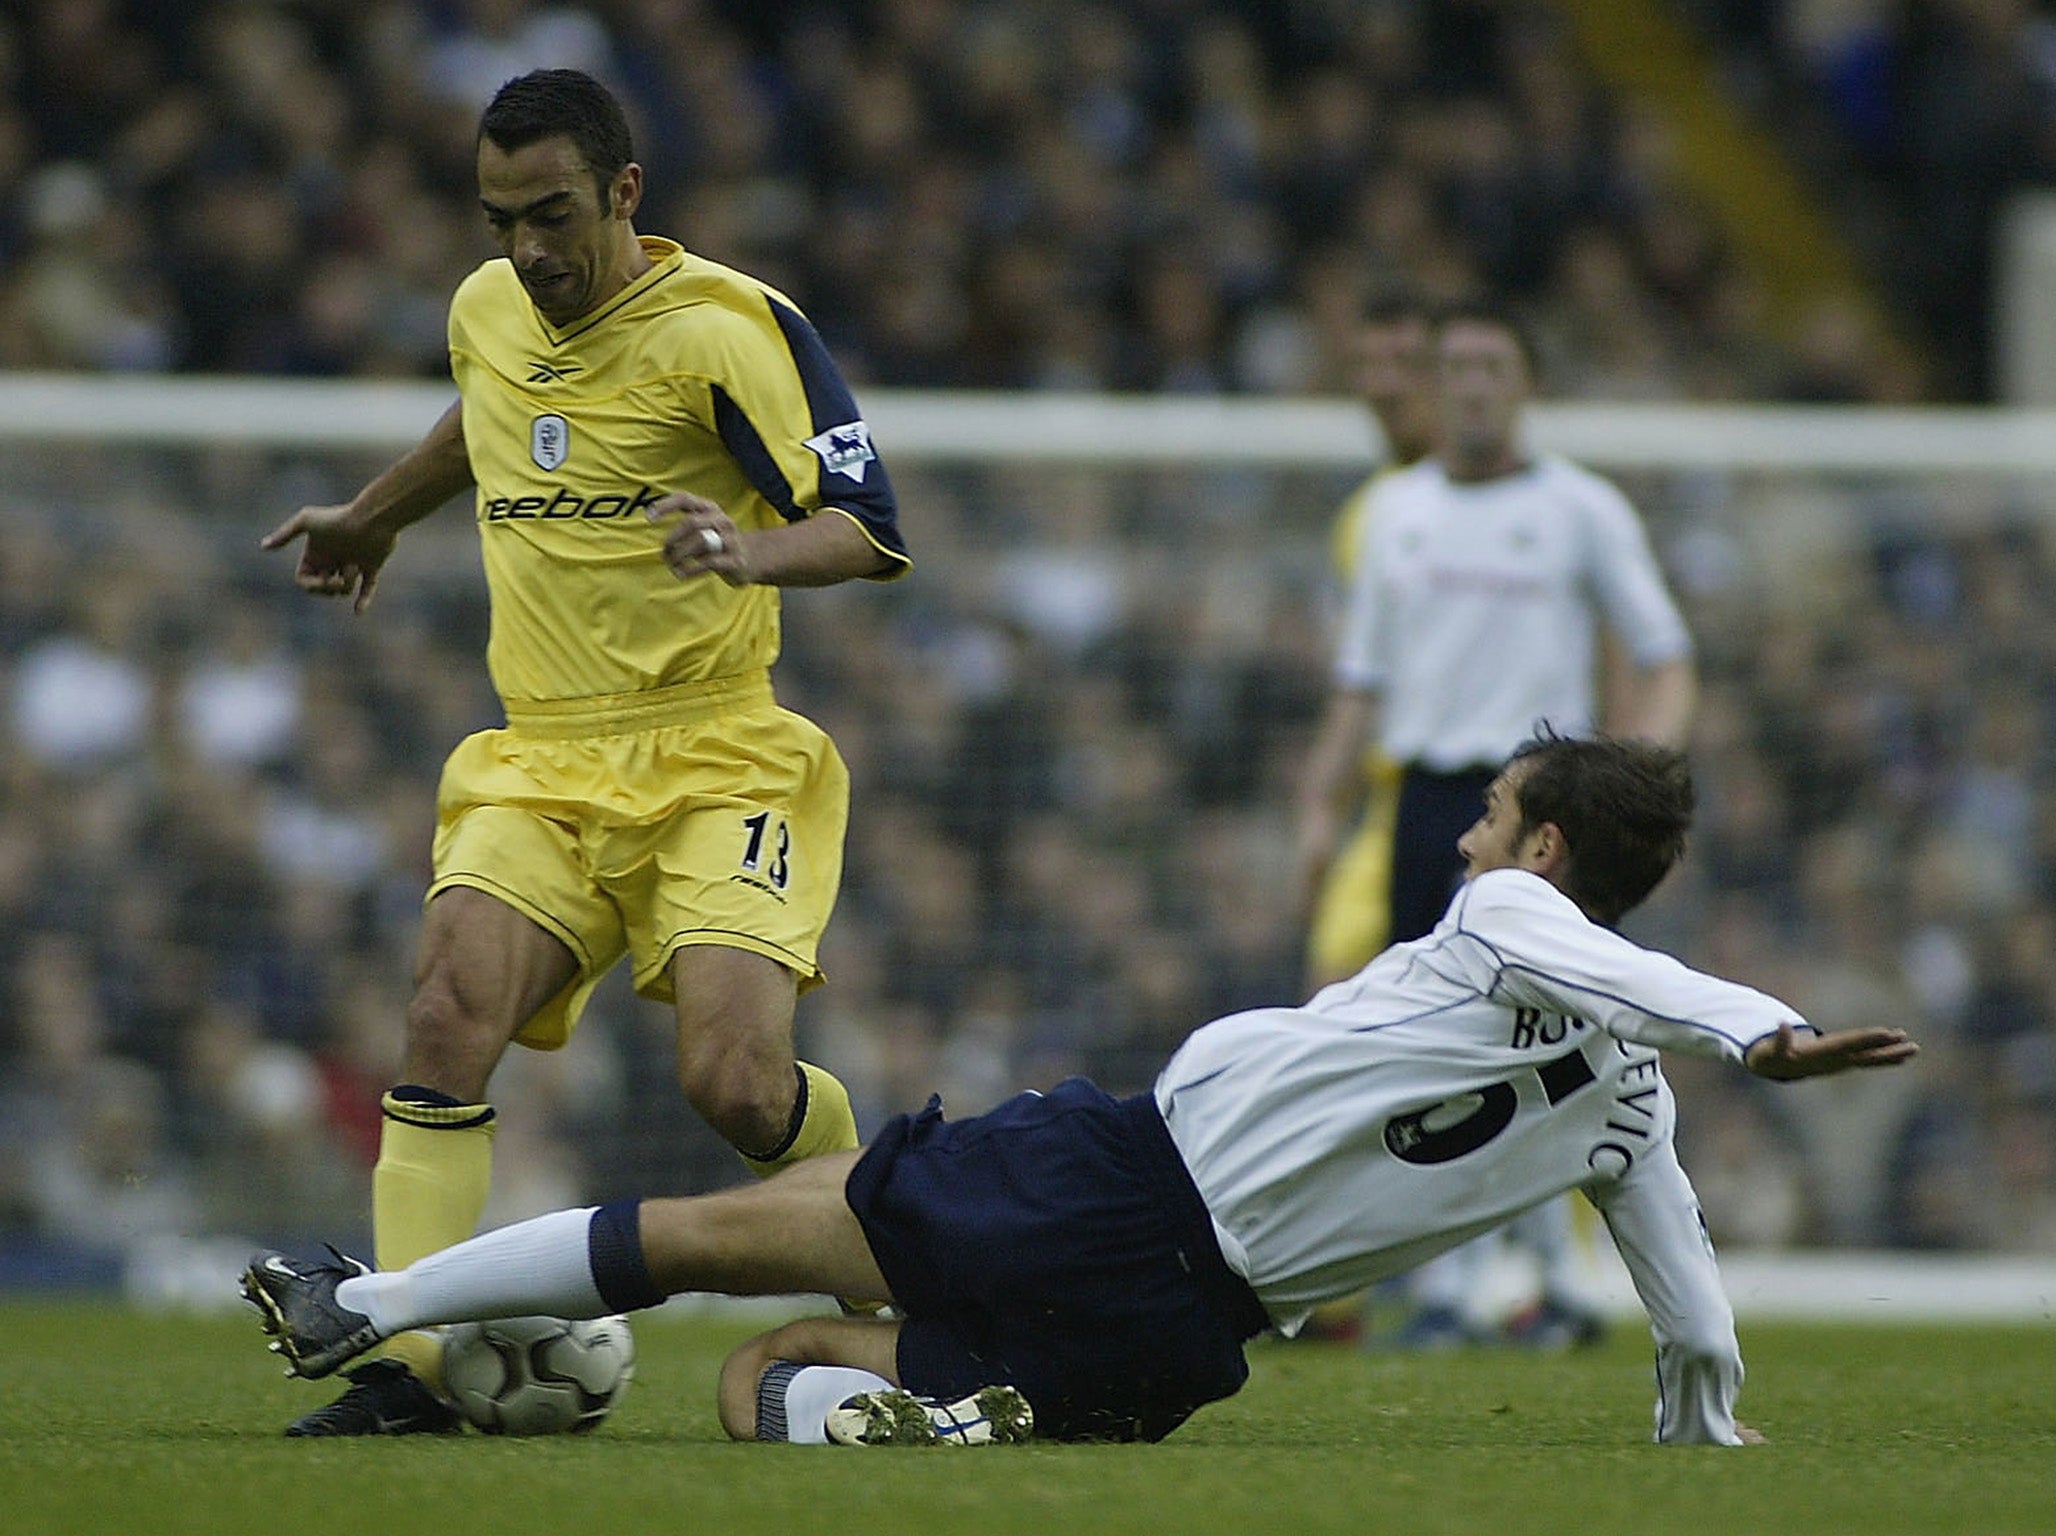 The defender in action against Bolton Wanderers in 2002